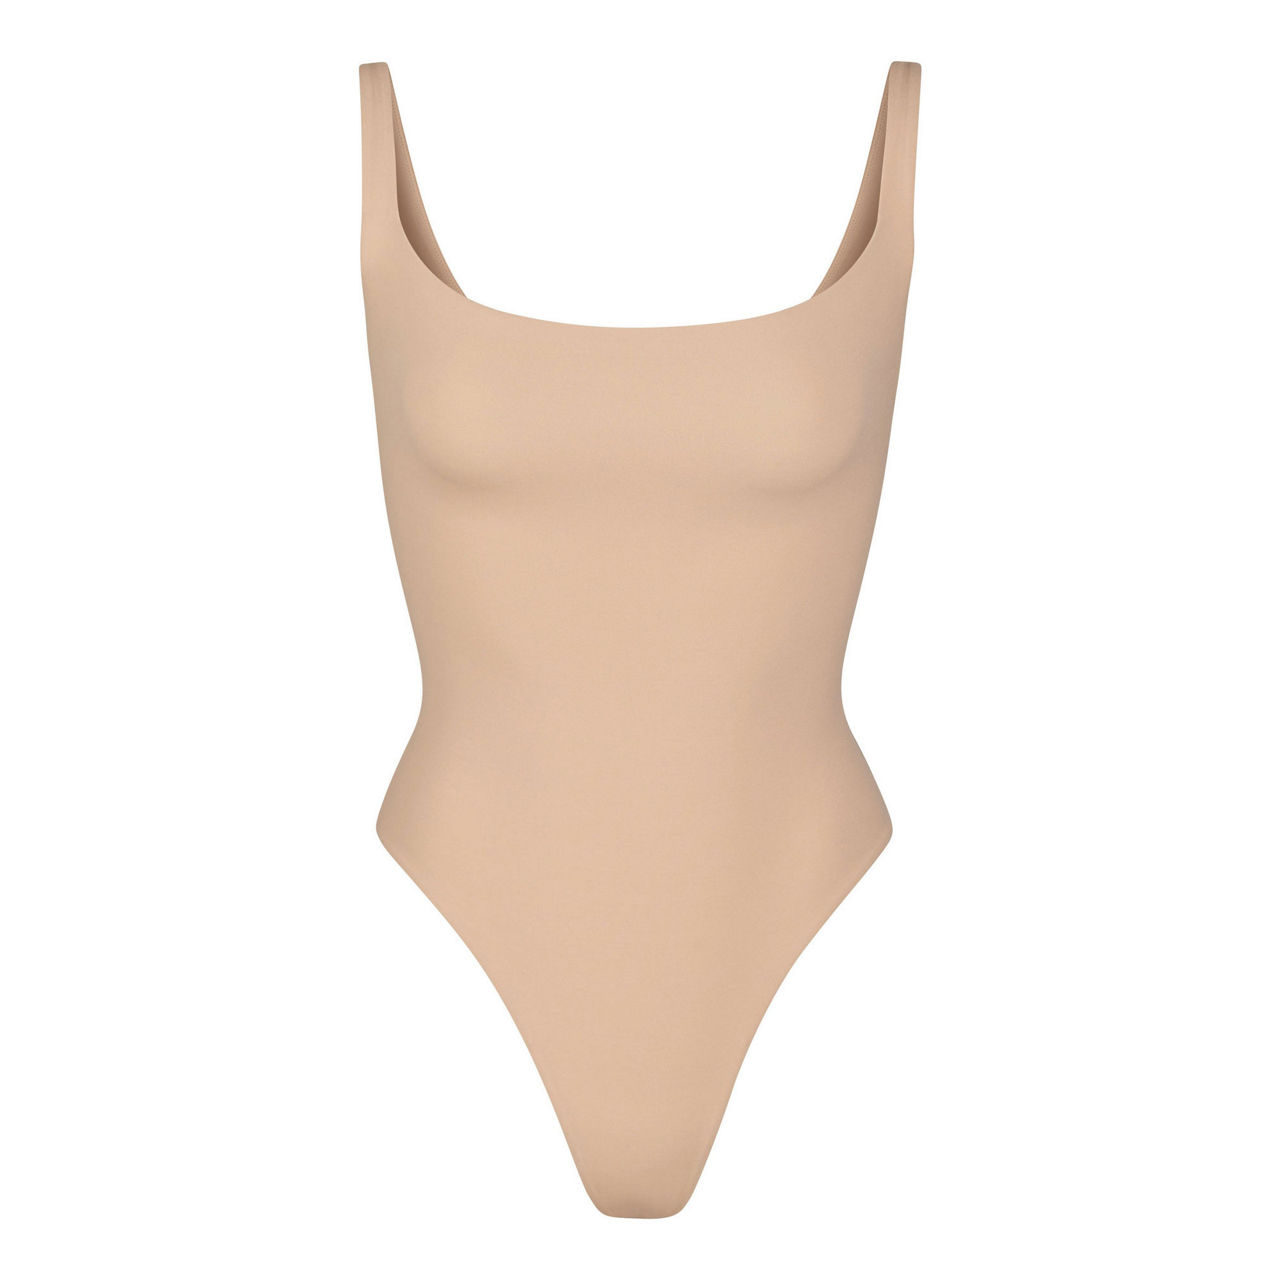 SKIMS launches wedding shapewear: From sculpted bodysuits and